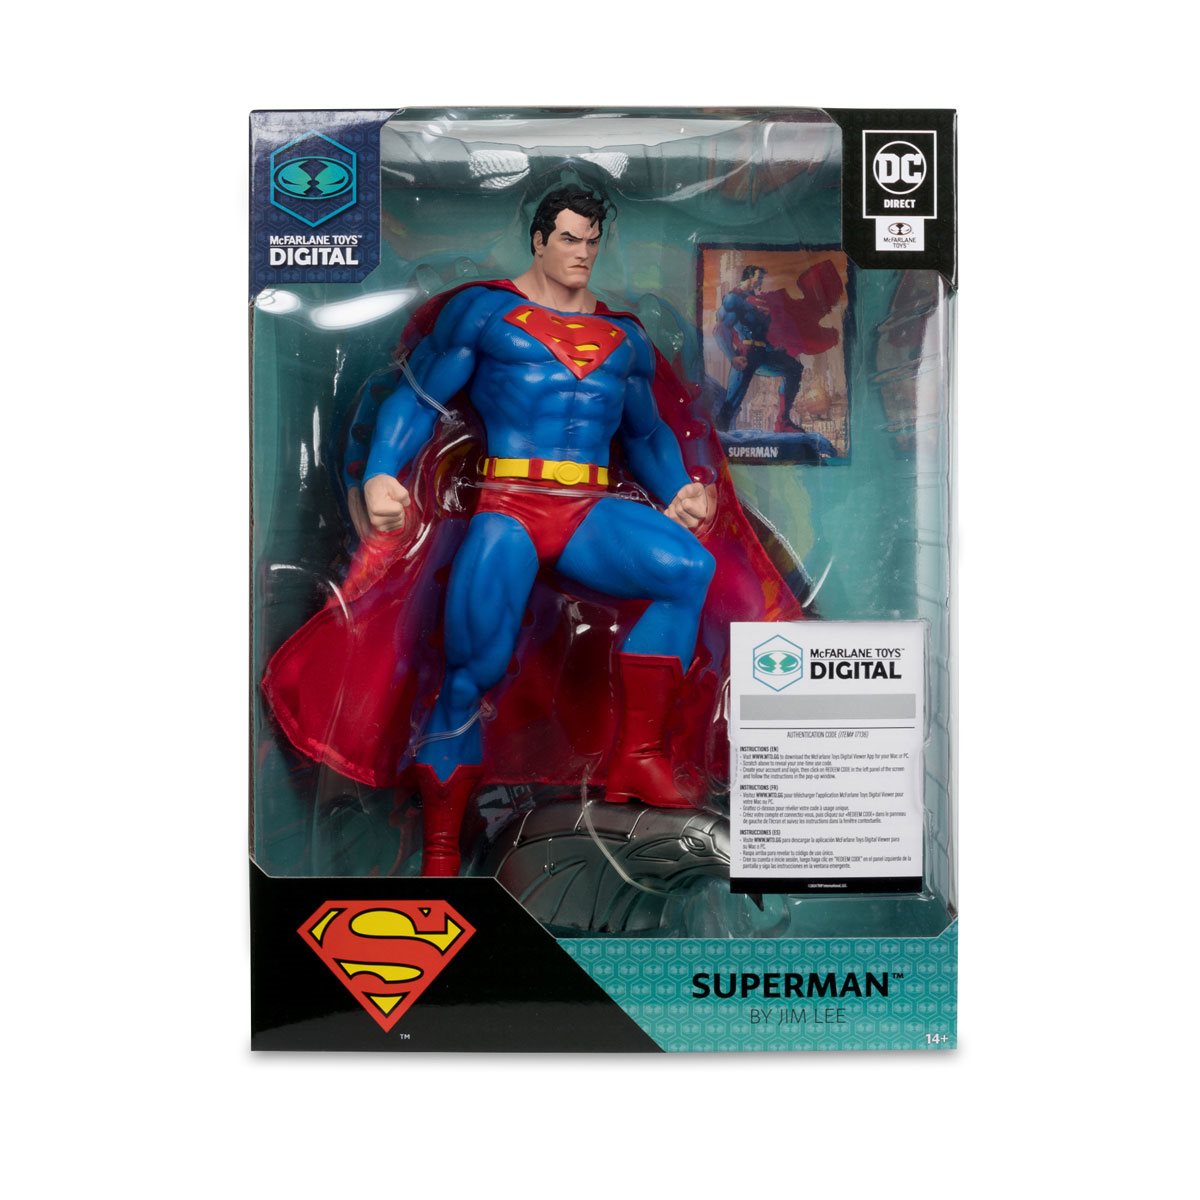 (PREVENTA) DC Direct Superman by Jim Lee 1:6 Scale Statue with McFarlane Toys Digital Collectible